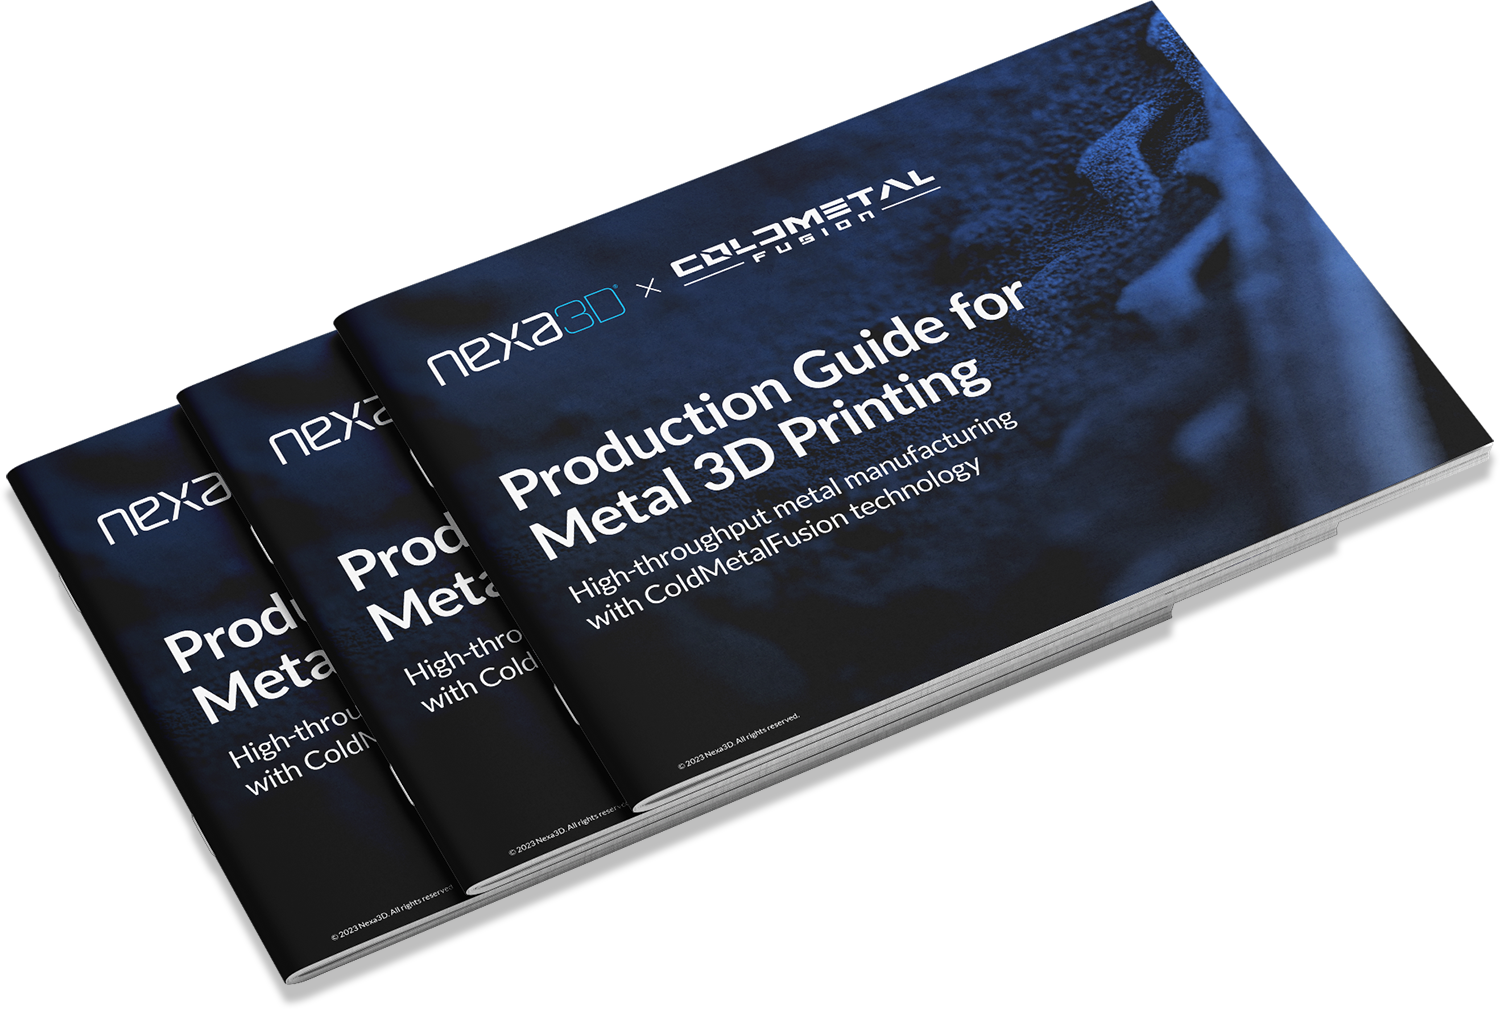 Download the product guide to metal 3D printing